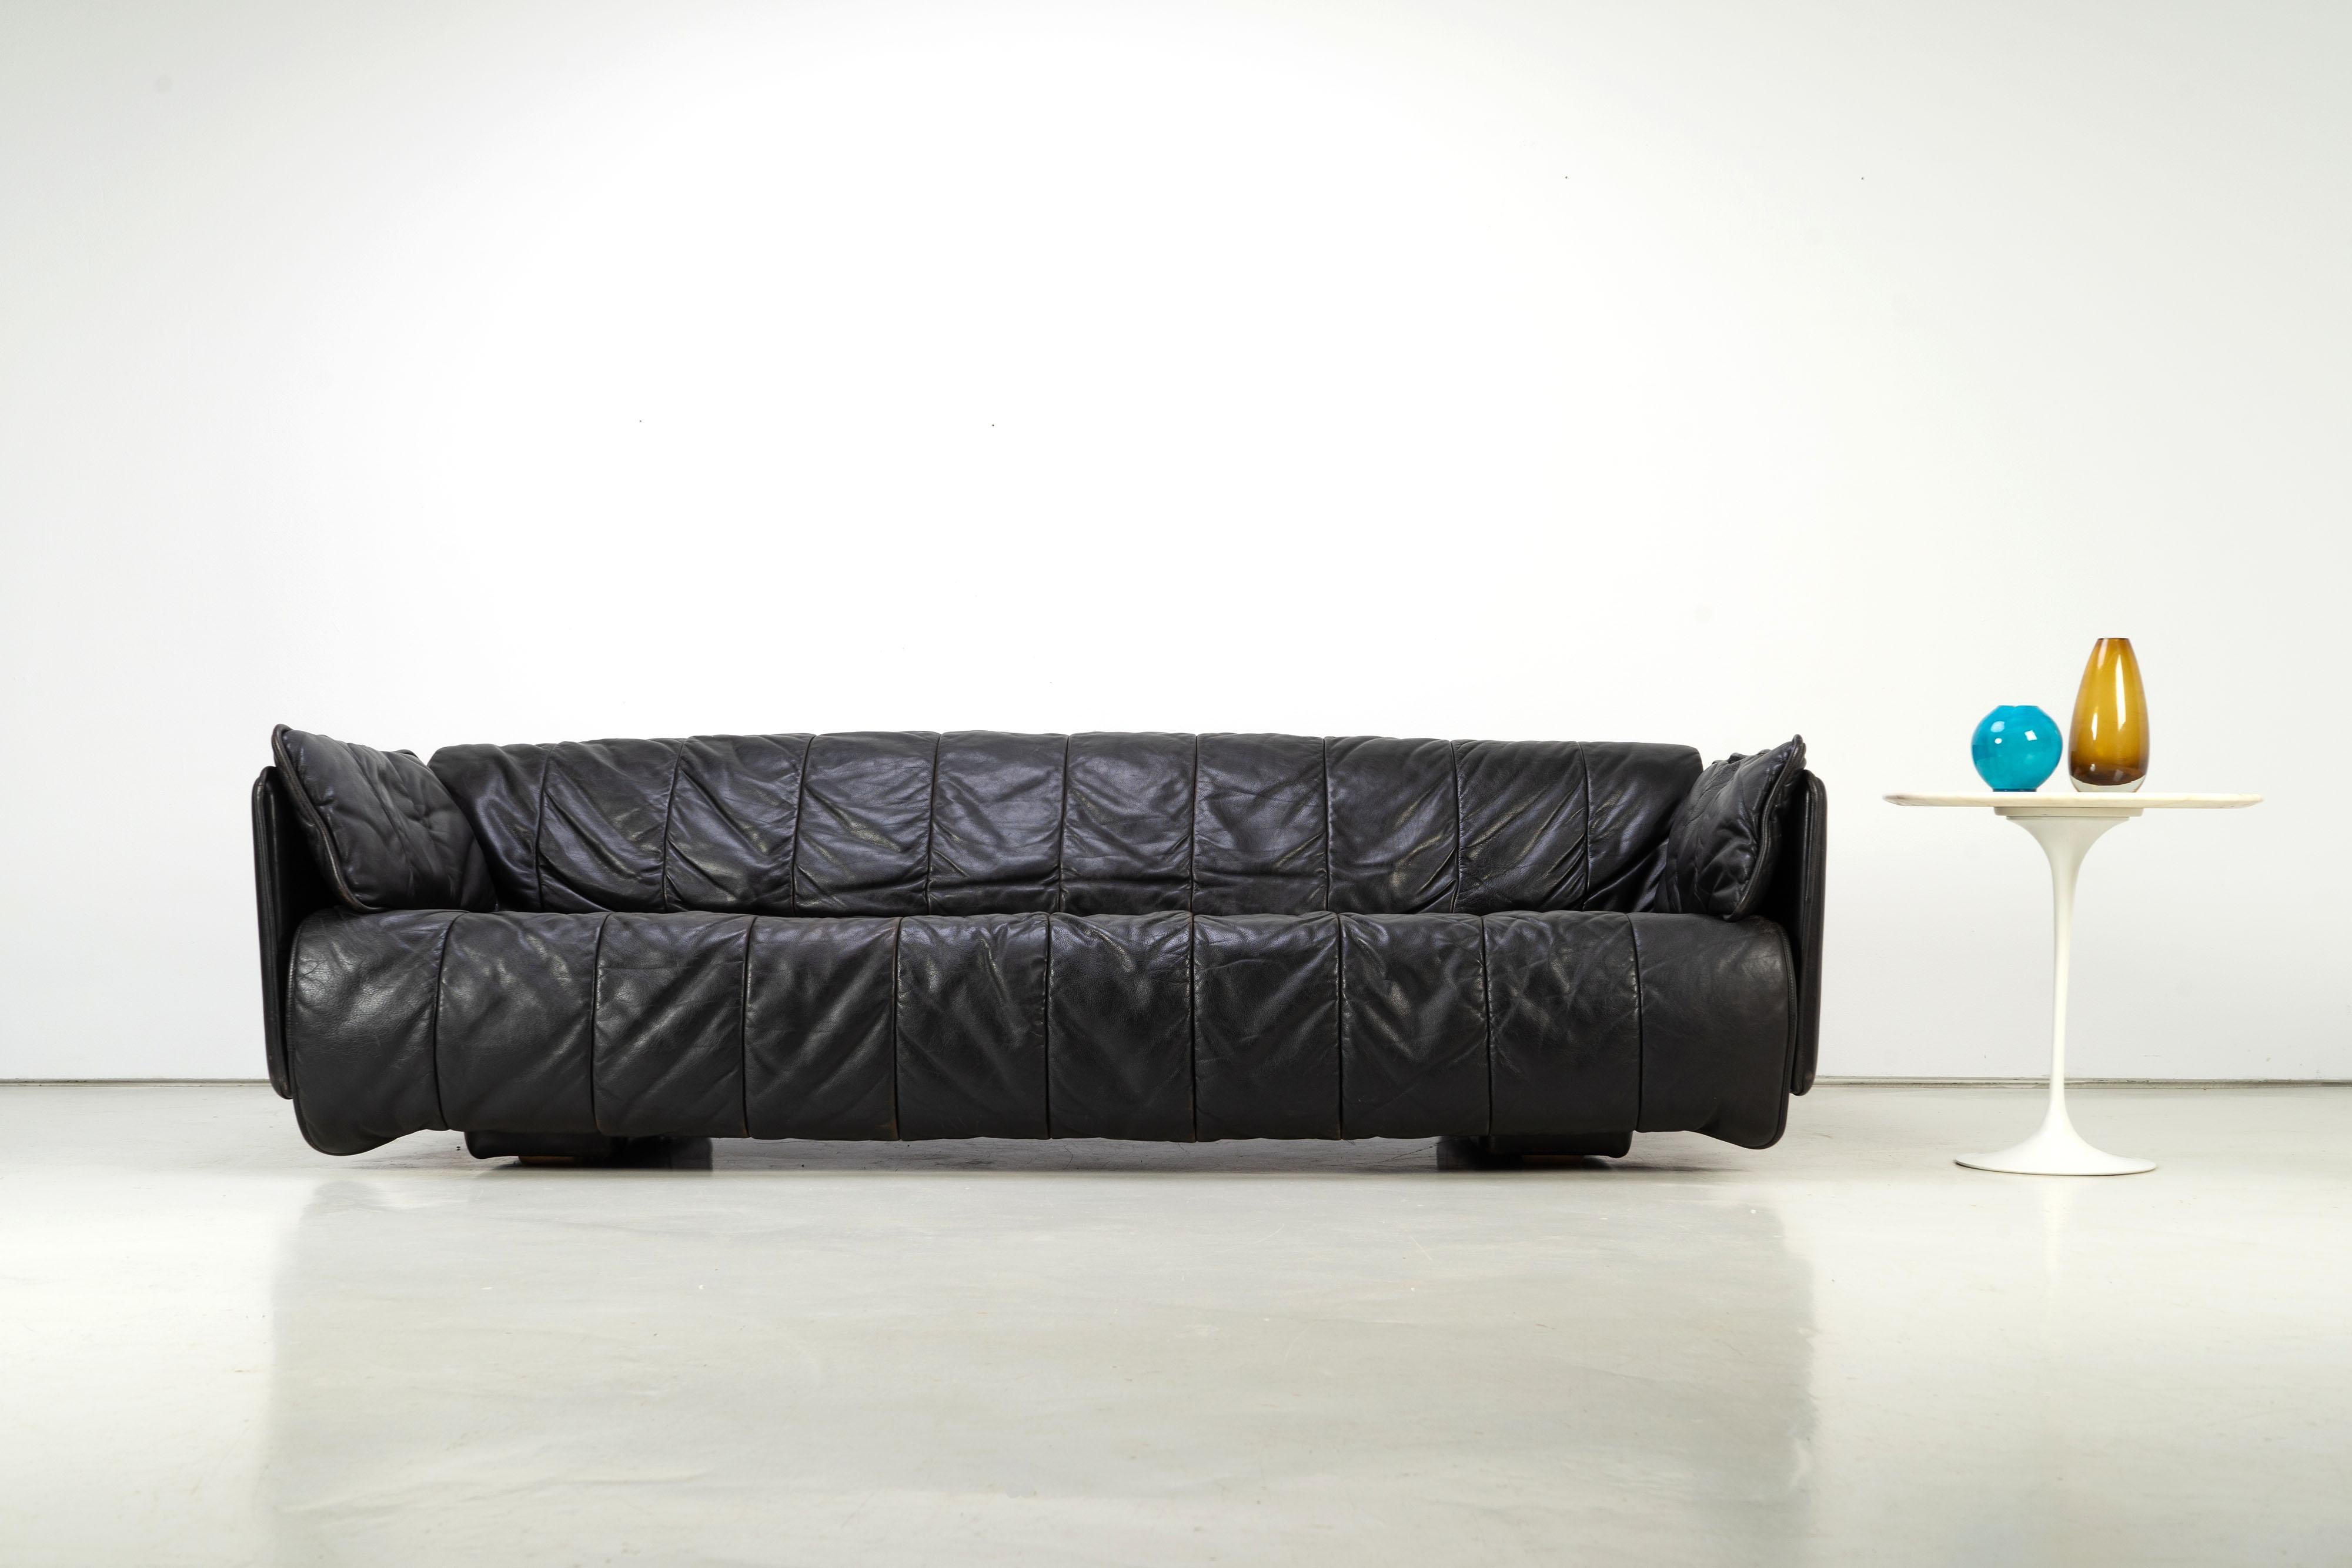 Freely positionable sofa by De Sede, made in Switzerland. This high quality three-seater can be converted into a formidable double bed with a width of 140 cm.